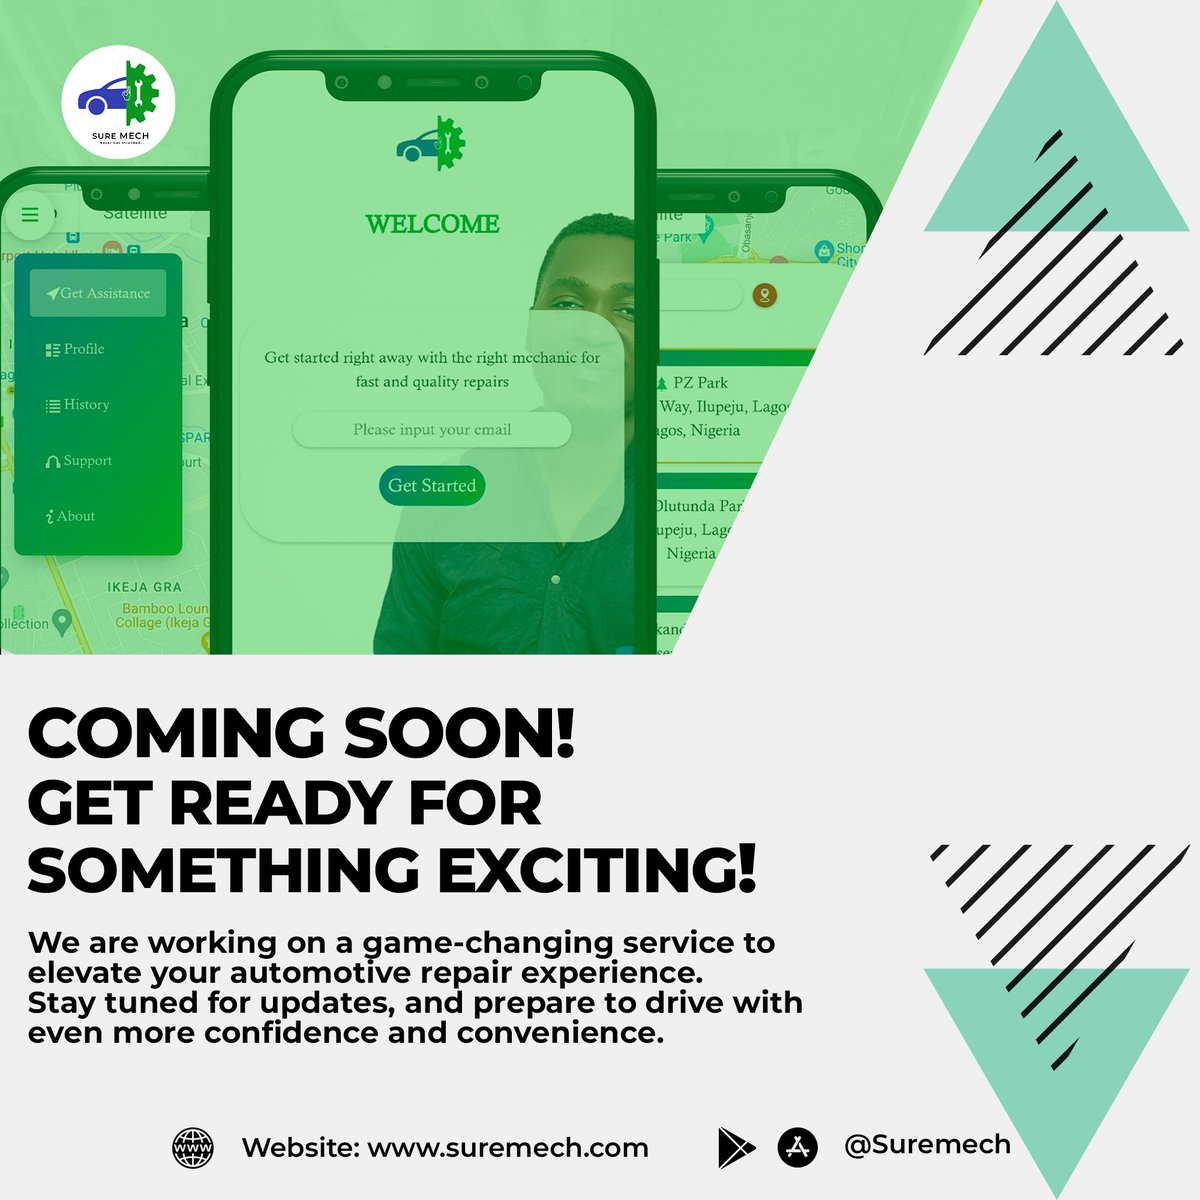 Get ready for something exciting! We are working on a game-changing service to elevate your automotive repair experience. Stay tuned for updates, and prepare to drive with even more confidence and convenience. 🚗✨
#suremech #comingsoon #innovation #automotiveexcellence